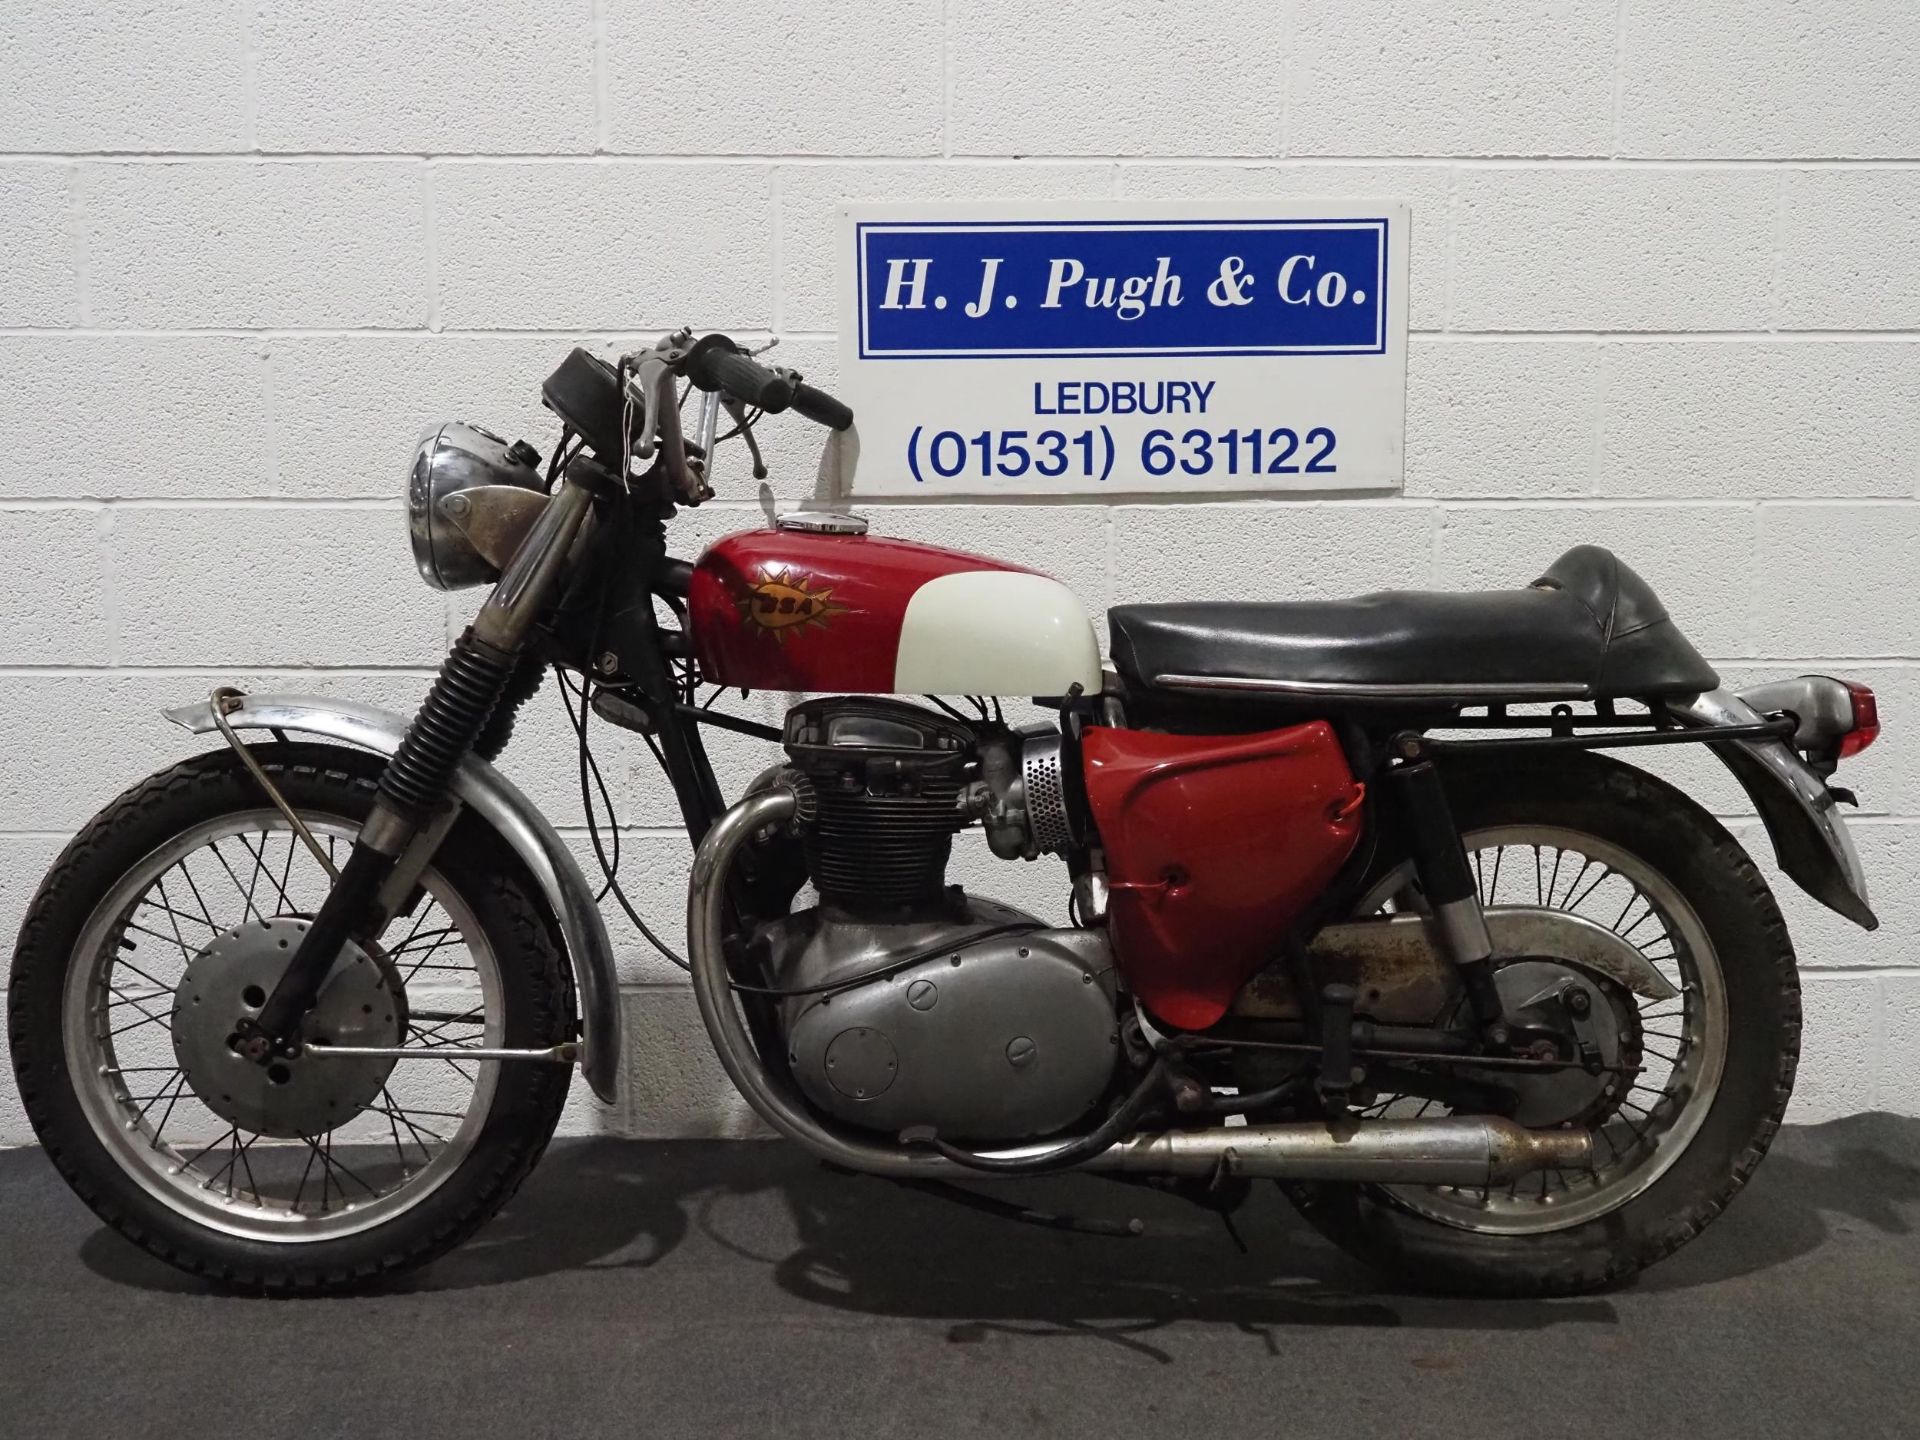 BSA A65 Spitfire motorcycle. 1966. Matching frame and engine numbers. US import with Nova documents. - Image 6 of 6